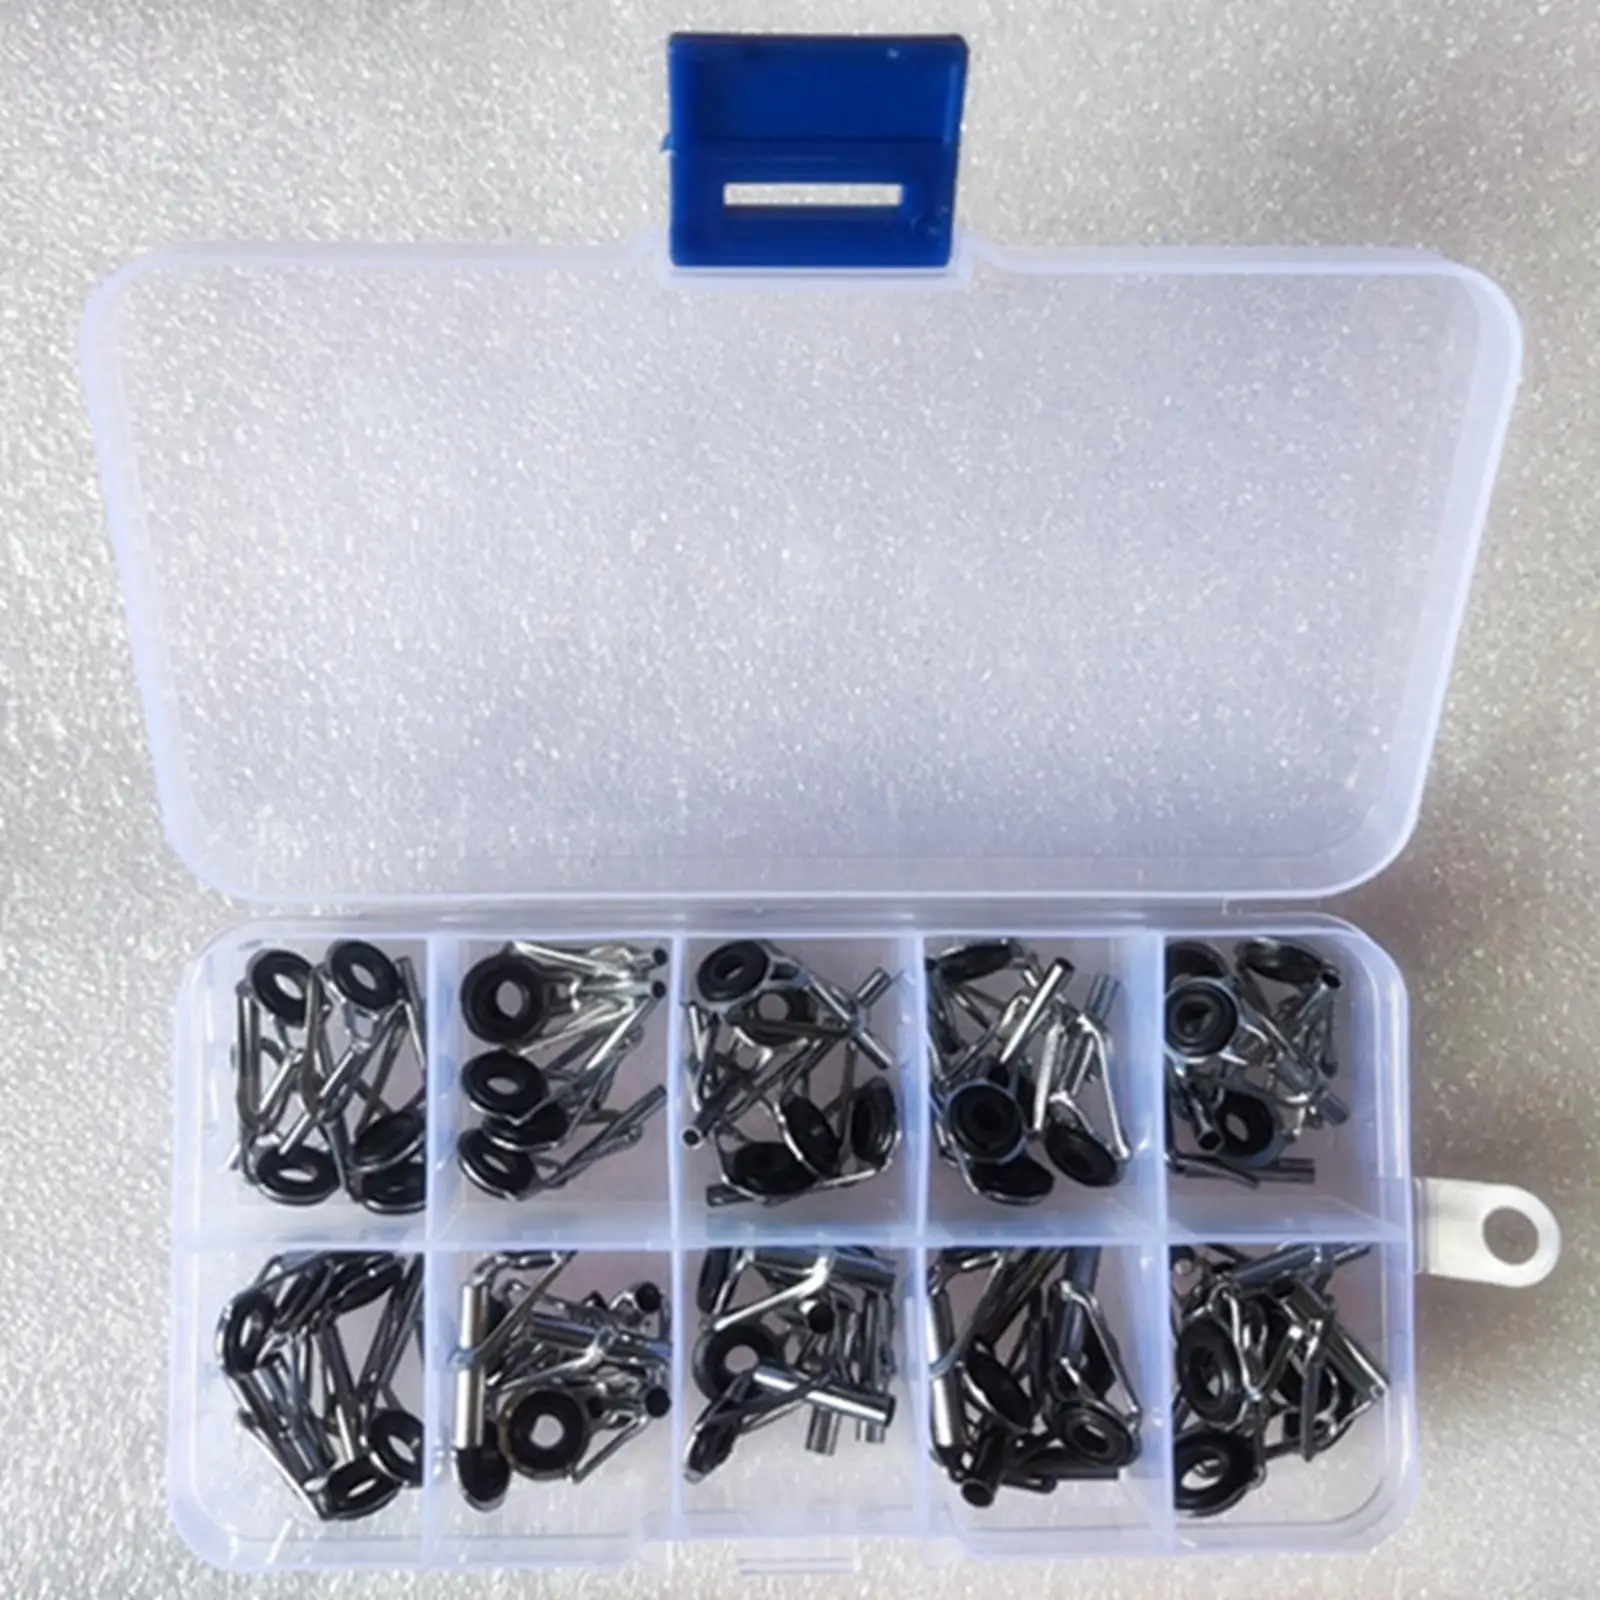 50Pcs Fishing Rod Guides Ring Set Mixed Size in A Box Guide Eye Durable DIY Eye Rings Top Rings Top Ring for Building Component